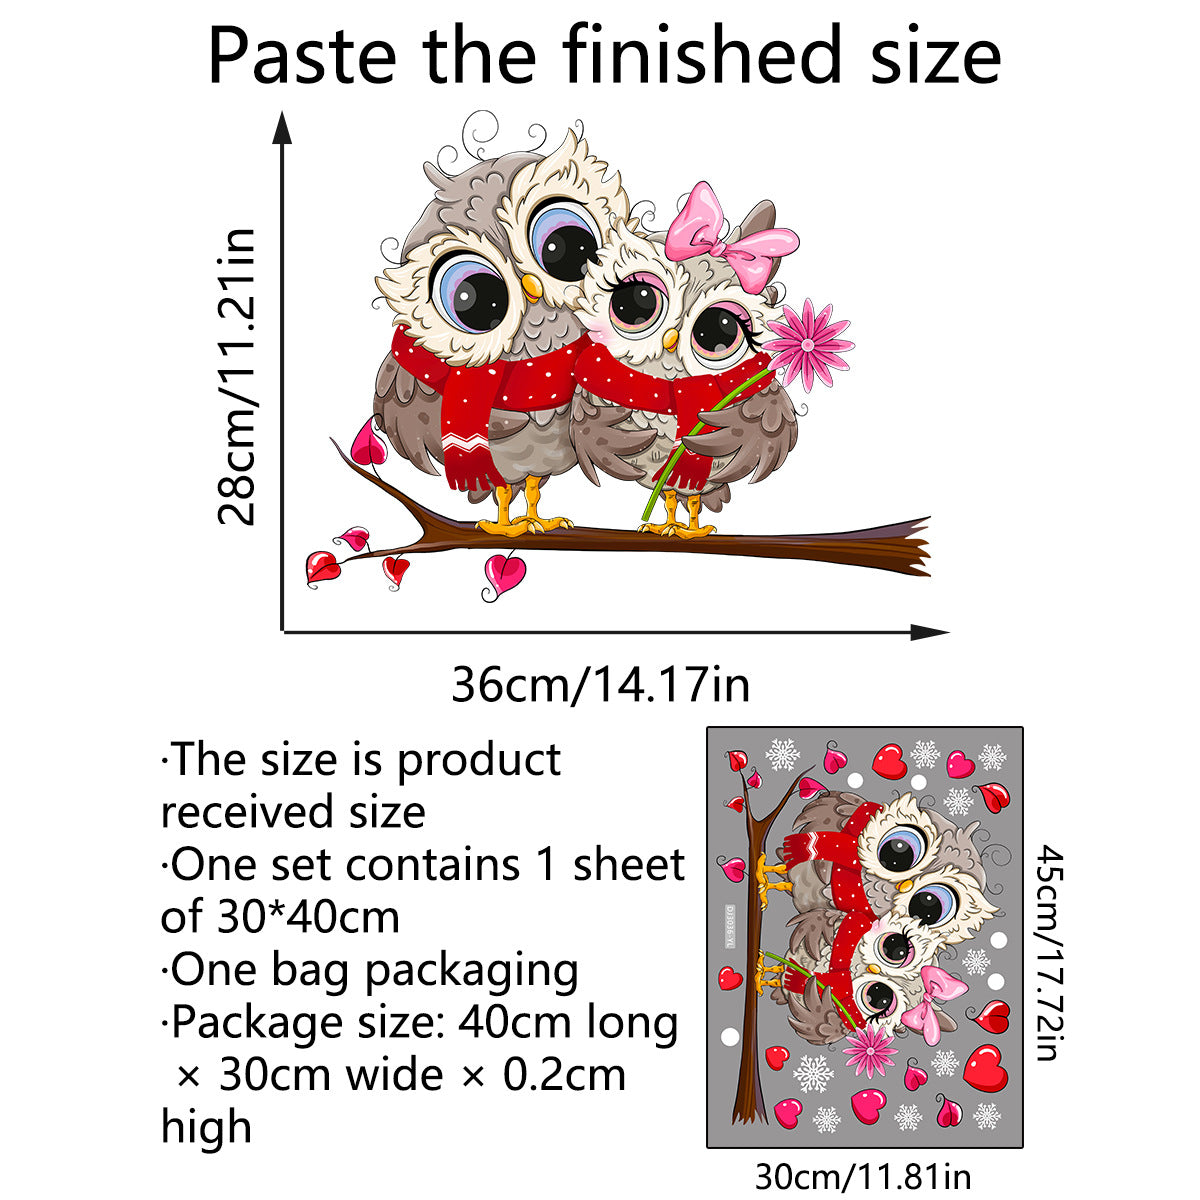 Cartoon Branch Owl Static Sticker Glass Window Home Decoration Wall Sticker, Valentine's Day decor, Romantic home accents, Heart-themed decorations, Cupid-inspired ornaments, Love-themed party supplies, Red and pink decor, Valentine's Day table settings, Romantic ambiance accessories, Heart-shaped embellishments, Valentine's Day home embellishments